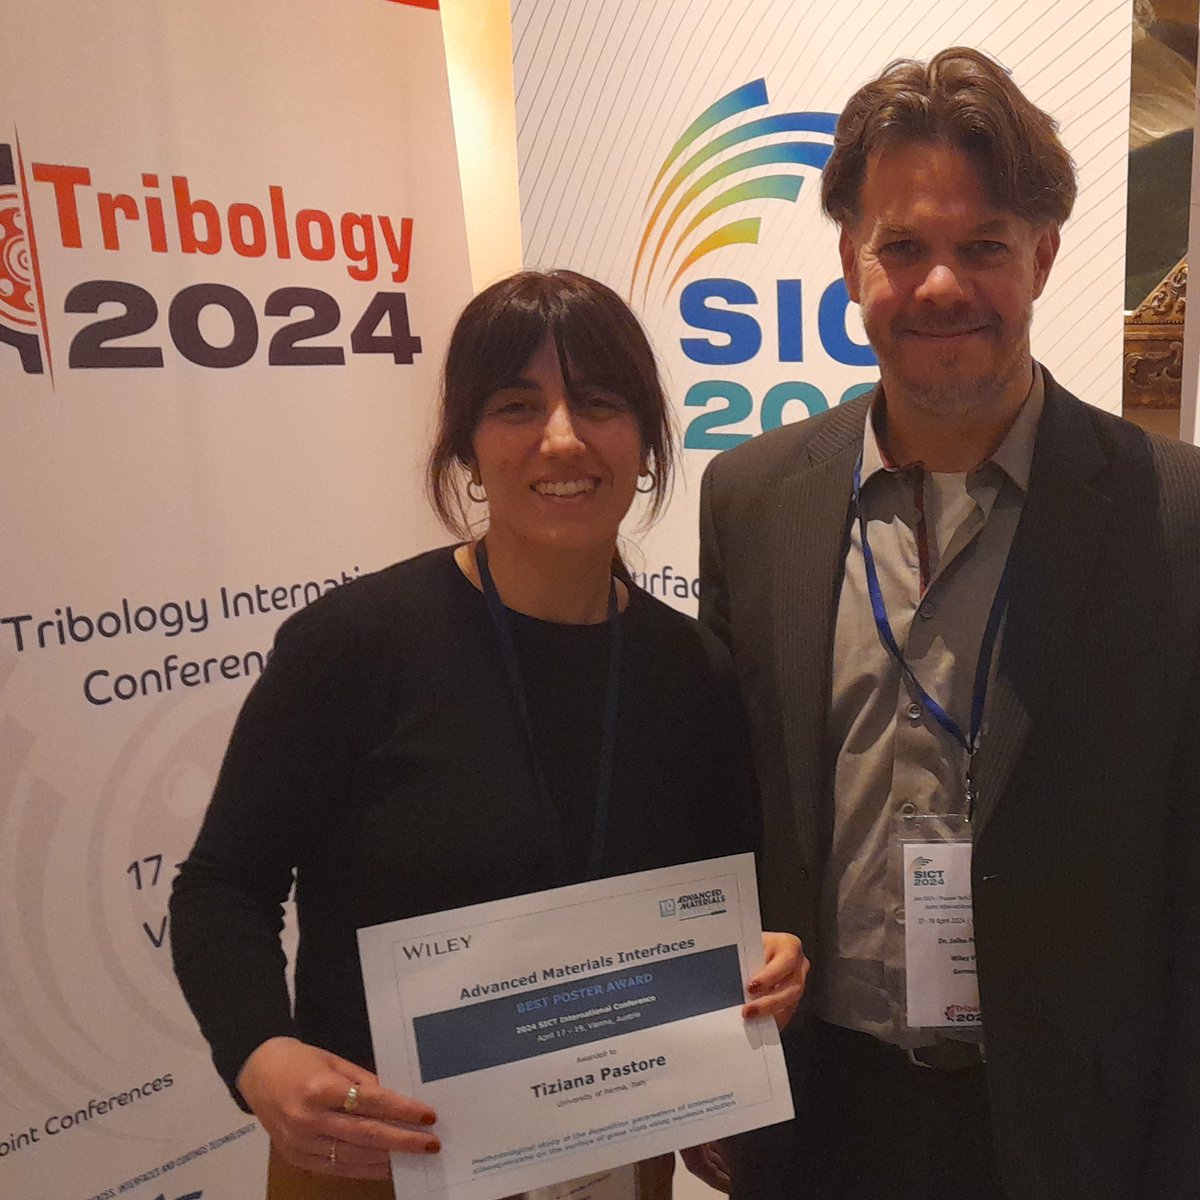 Enjoyed the Surfaces #Interfaces and #Coatings #Technologies international conference in Vienna! Thanks to @SETCORORG for a wonderful event. Particularly proud to present Poster Awards - sponsored by Advanced Materials #Interfaces - to PhD students. Looking forward to next year!